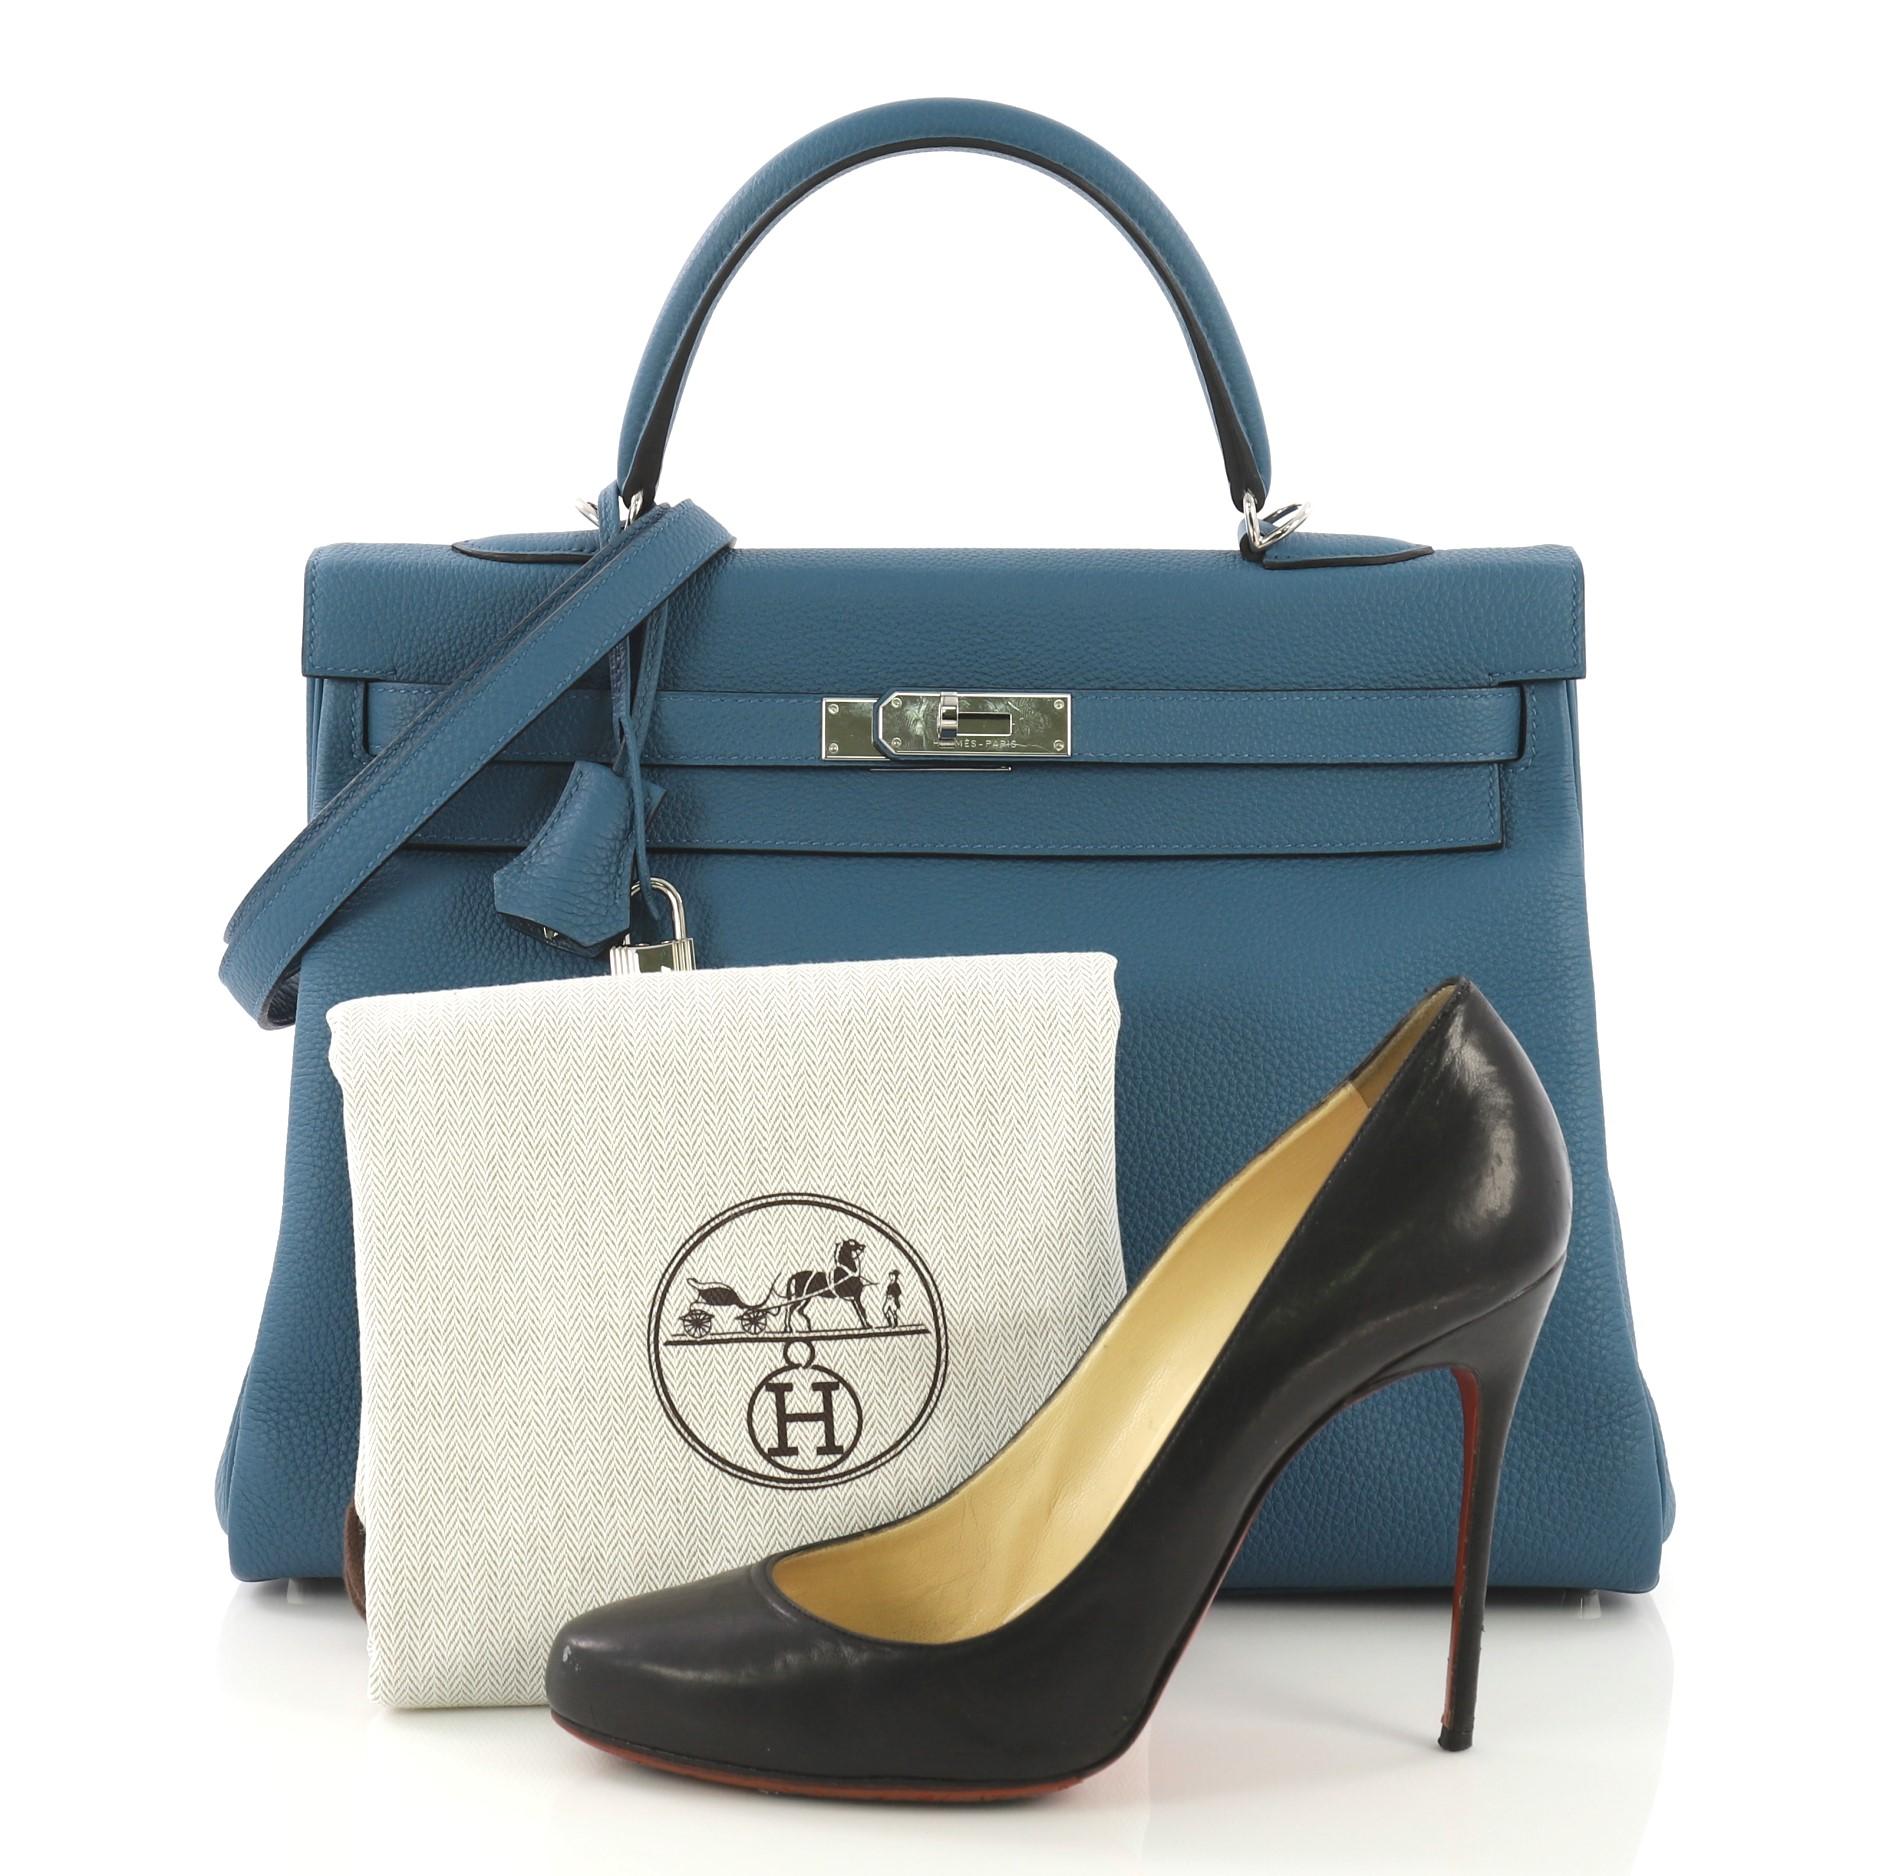 This Hermes Kelly Handbag Cobalt Togo with Palladium Hardware 35, crafted in Cobalt blue Togo leather, features a single rolled top handle, frontal flap, and palladium hardware. Its turn-lock closure opens to a Cobalt blue Chevre leather interior